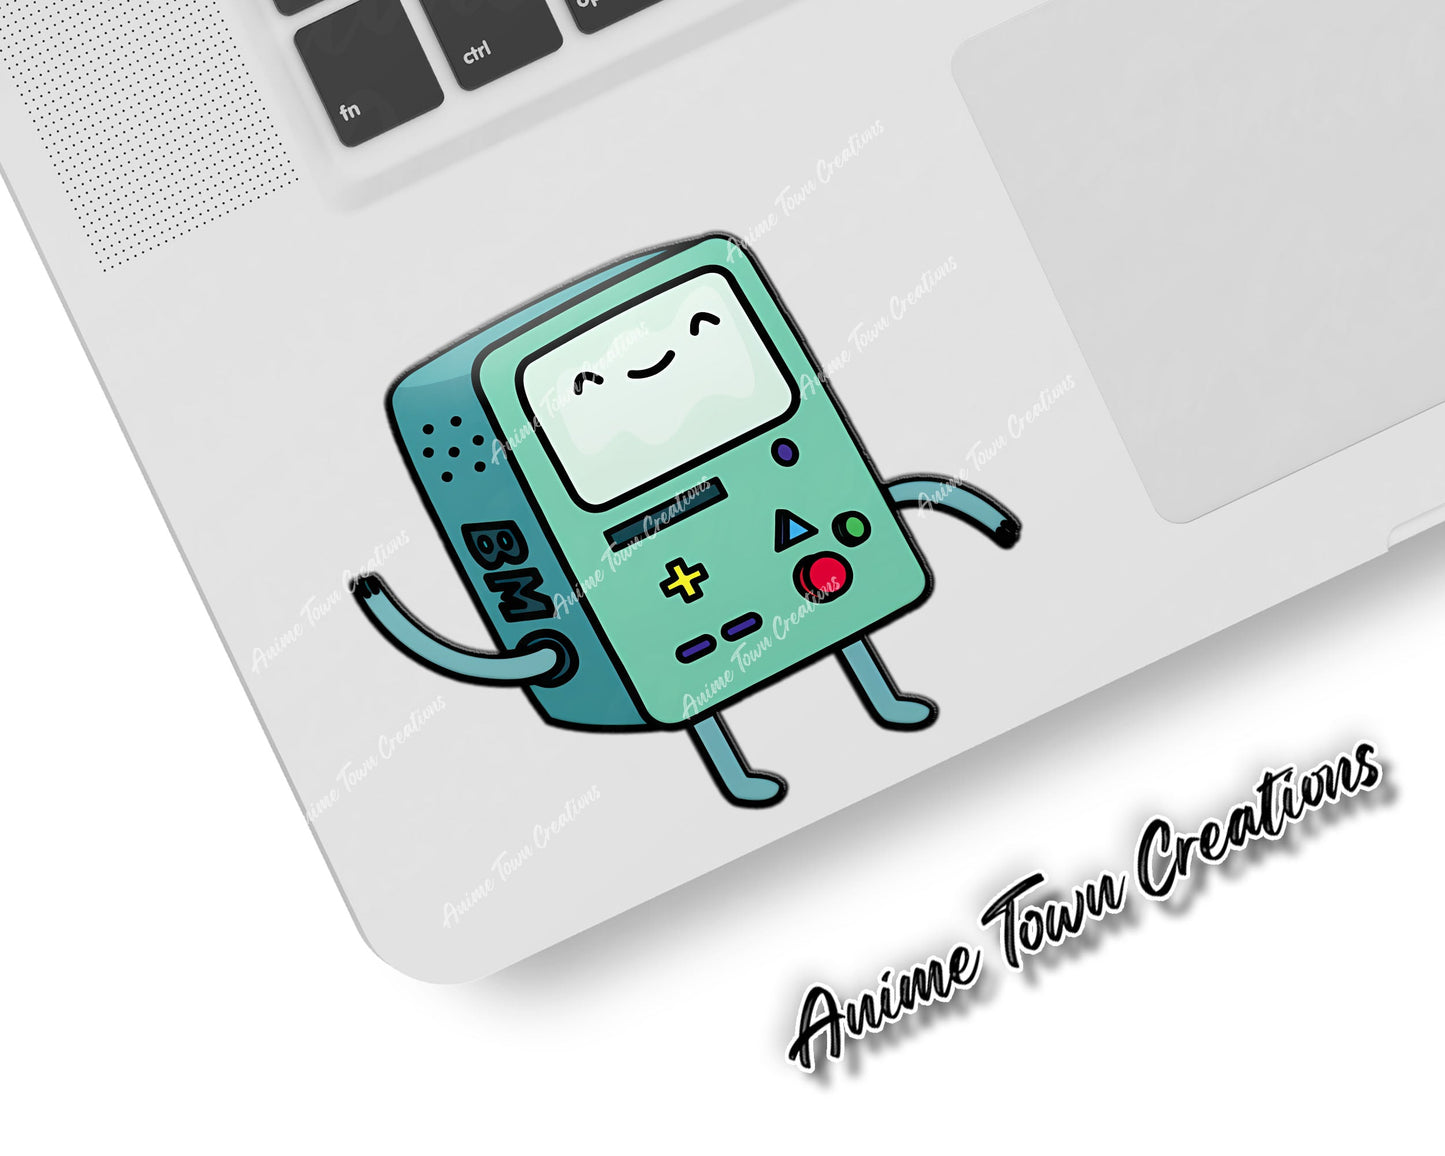 Anime Town Creations Sticker Adventure Time Beemo 5" Accessories - Anime Adventure Time Sticker